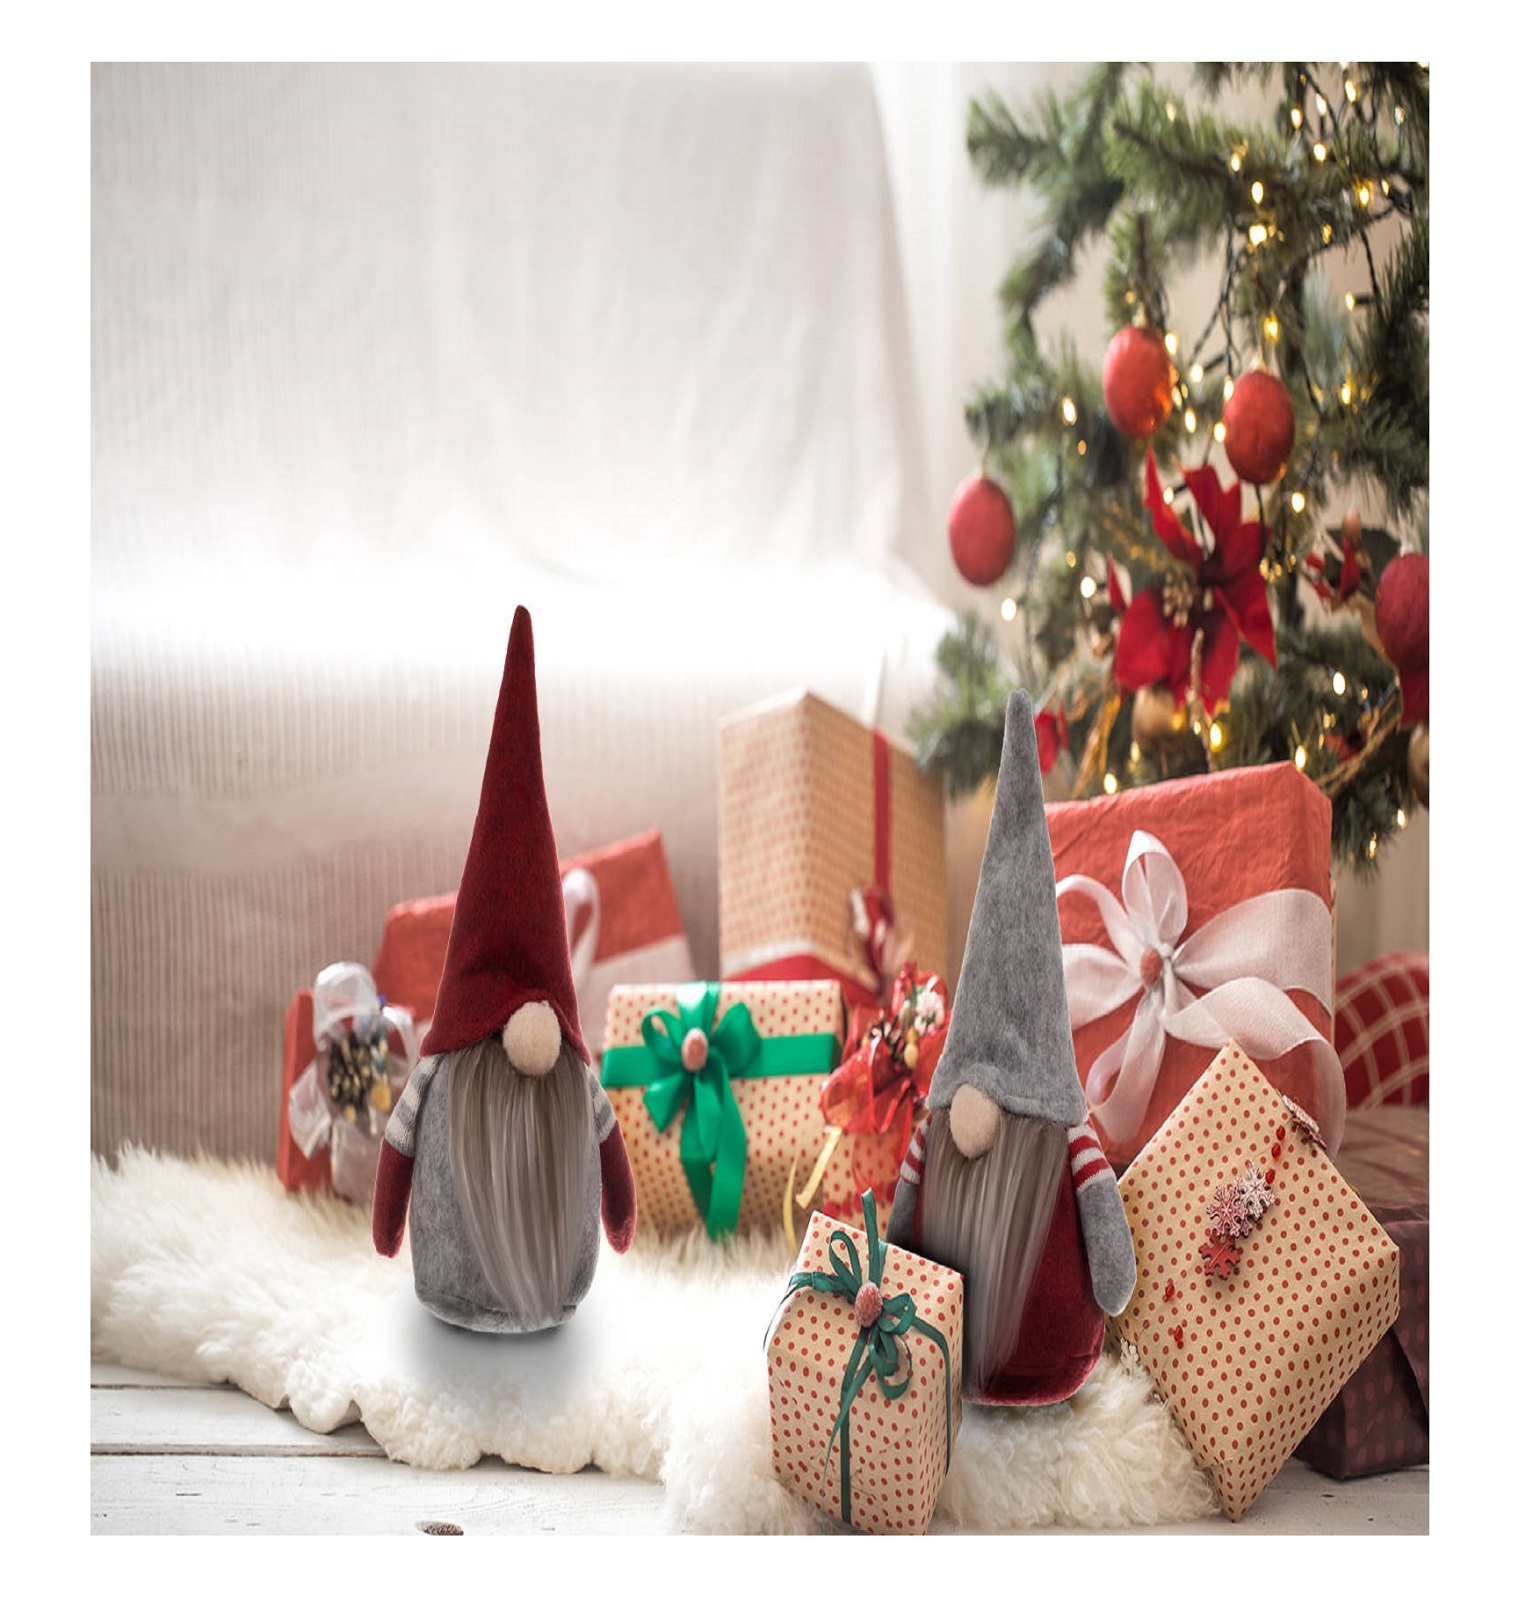 Pile of Christmas presents over light background on wooden table with cozy rug. Christmas decorations